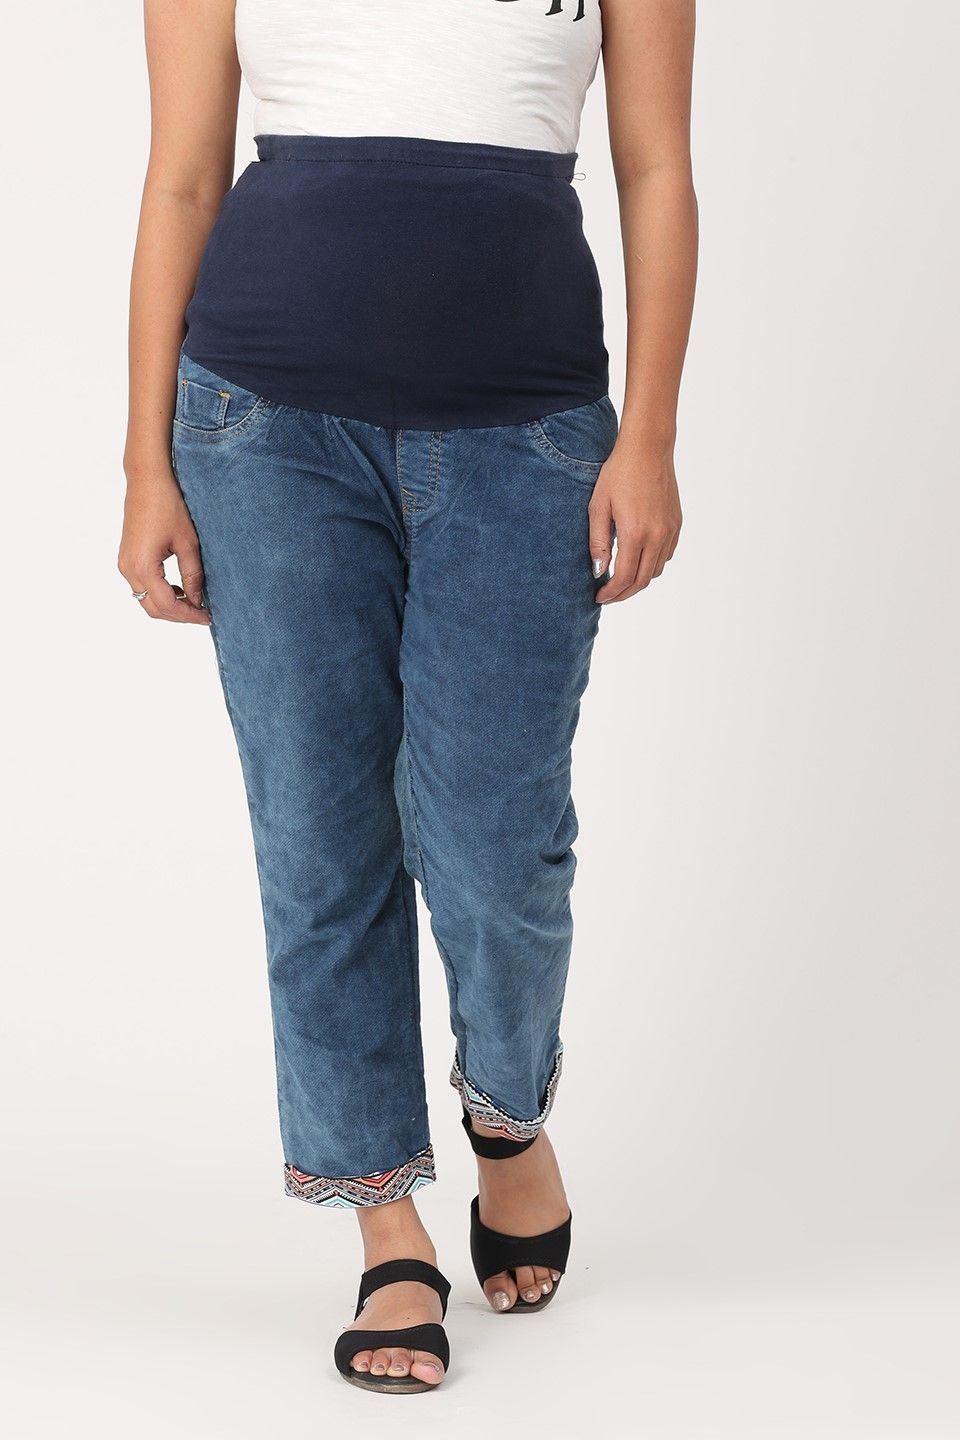 Charismomic Ankle Length Straight Maternity Jeans - Blue